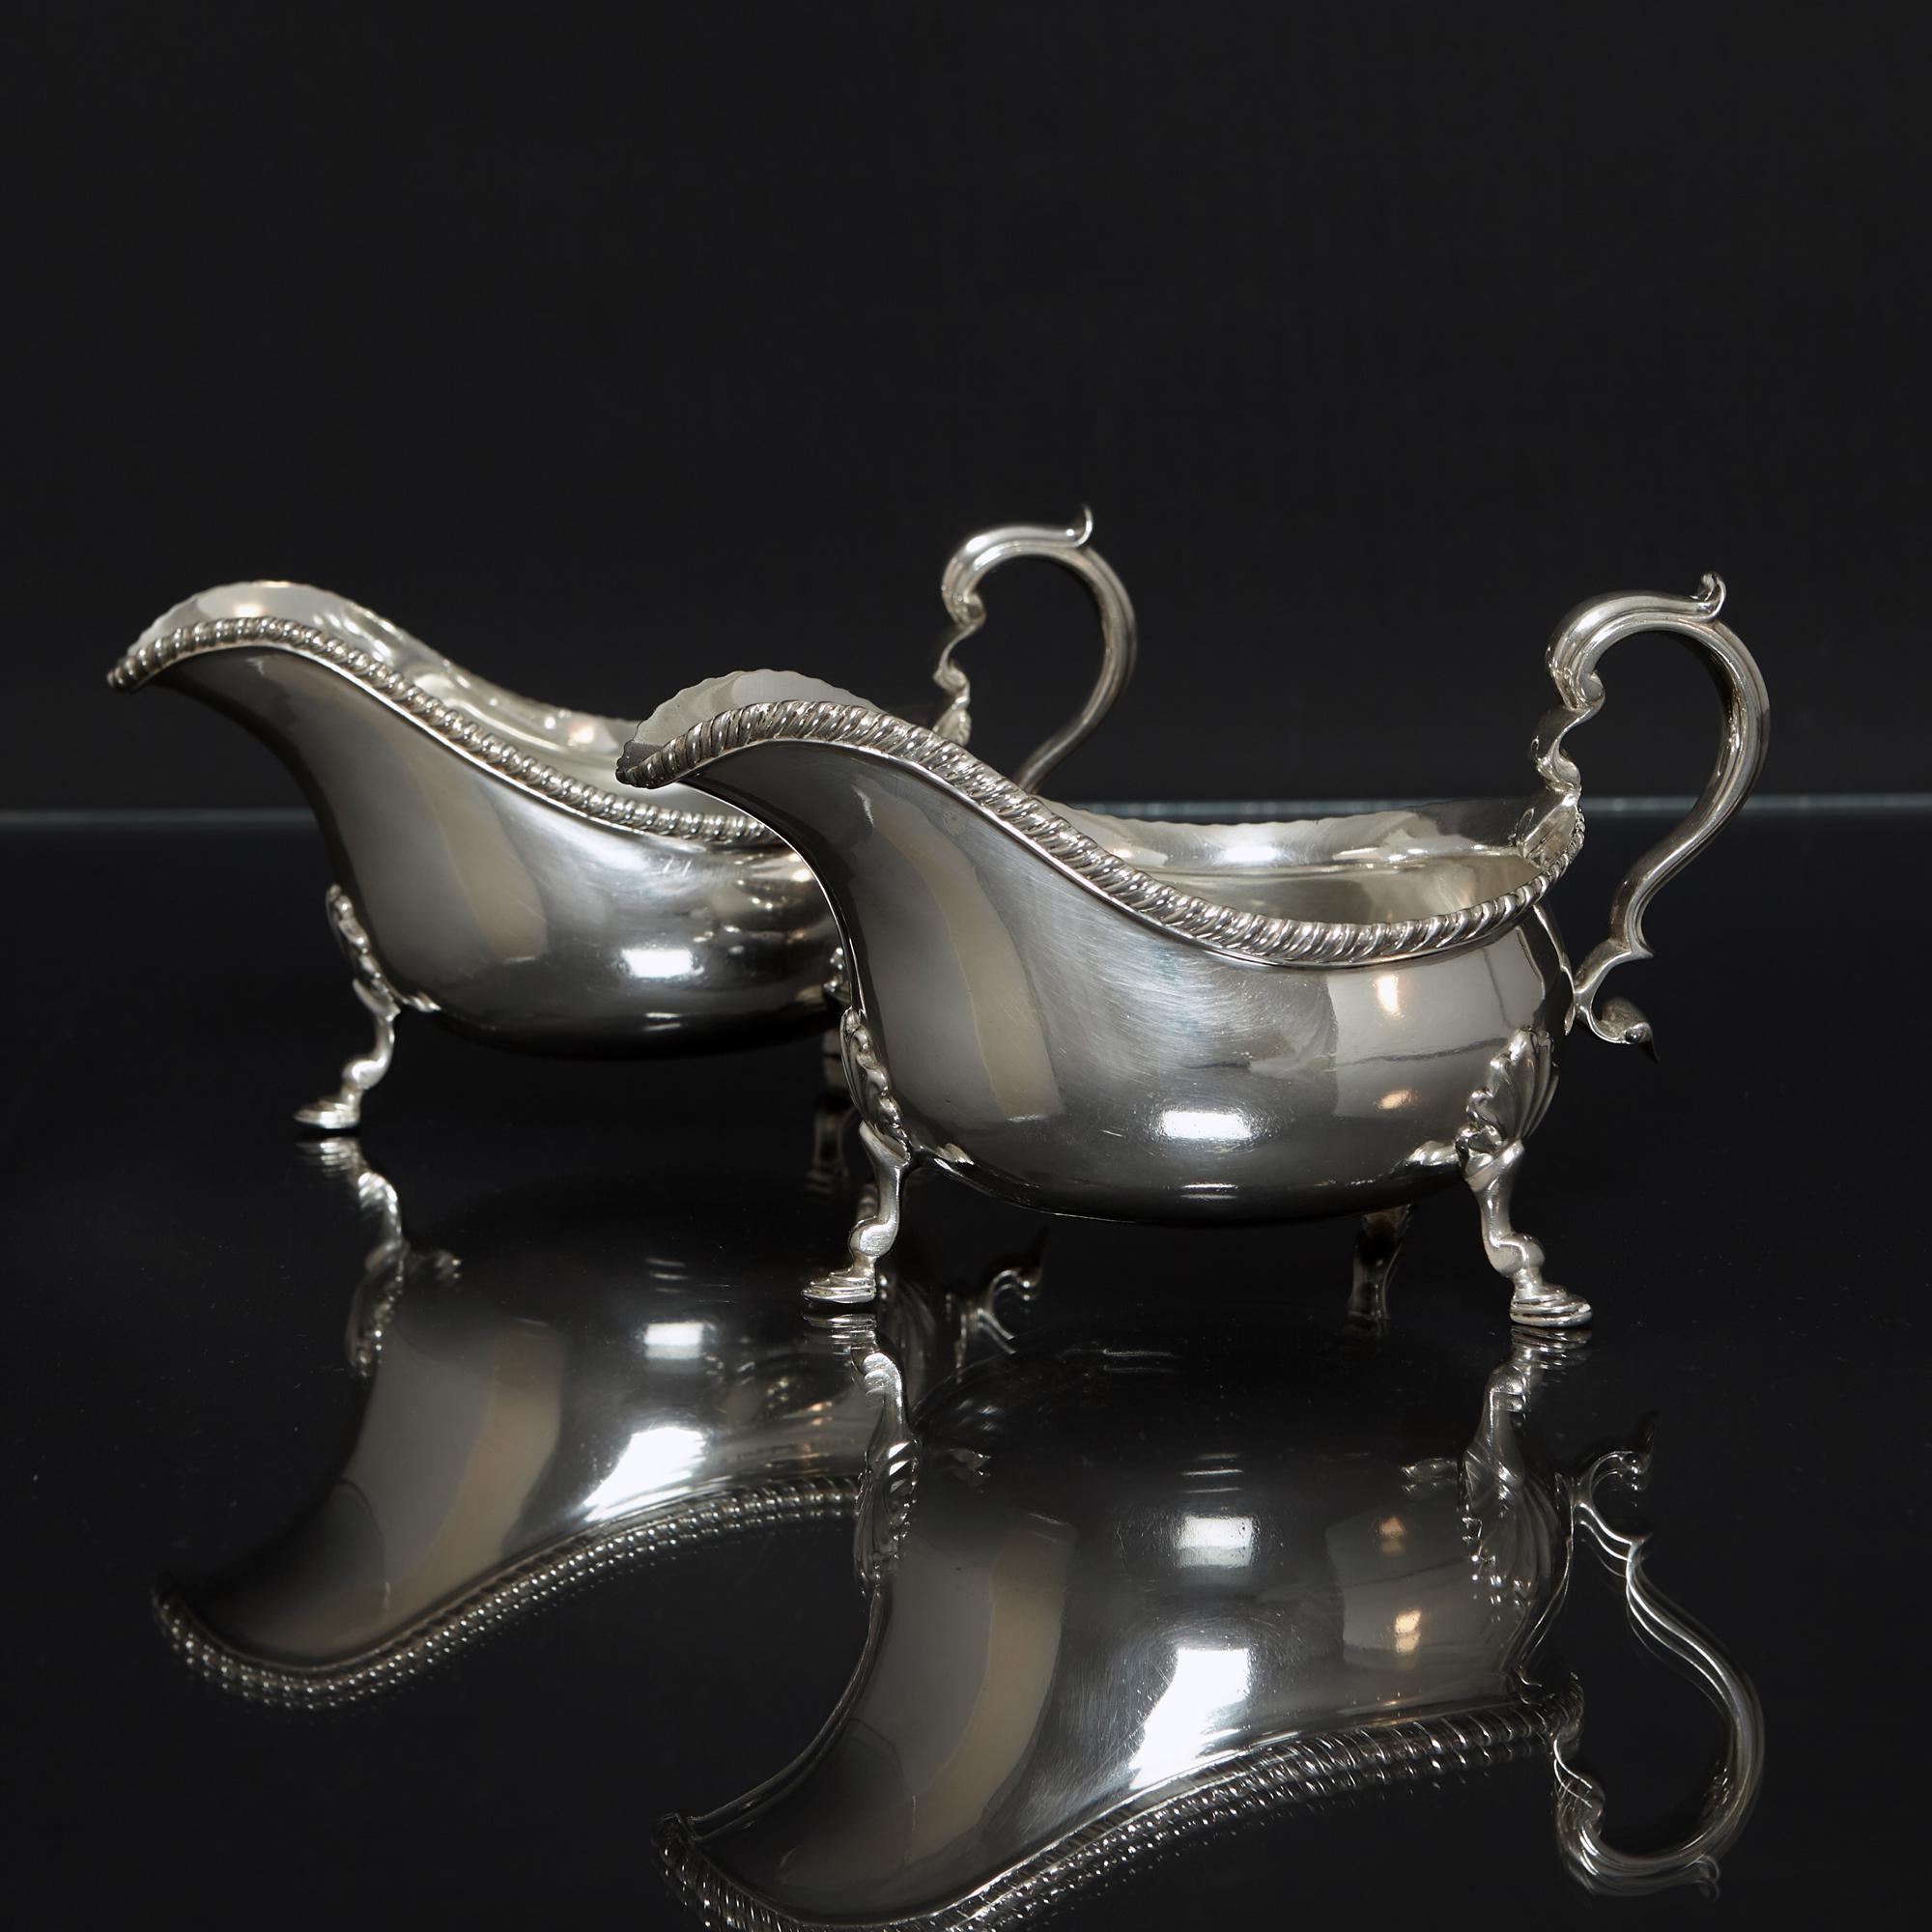 Pair of large George III style silver gravy boats with applied slant gadroon pattern borders. Each boat has cast leaf-capped scroll handles and three legs with stylised shell bolsters and hoof supports.

While some vessels have been identified as